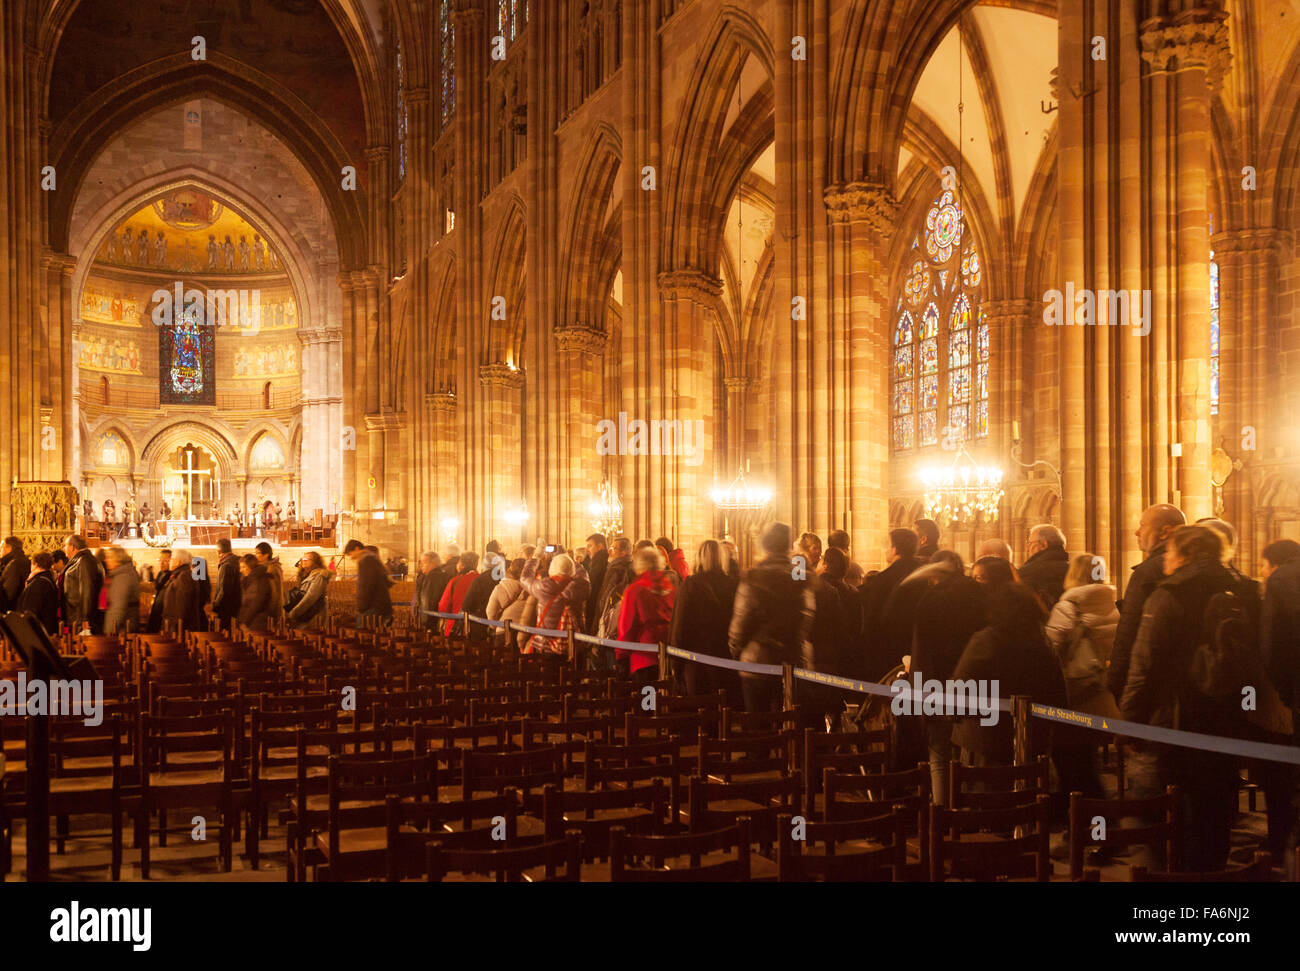 Tourists in the interior, Strasbourg Cathedral, Strasbourg, France Europe Stock Photo